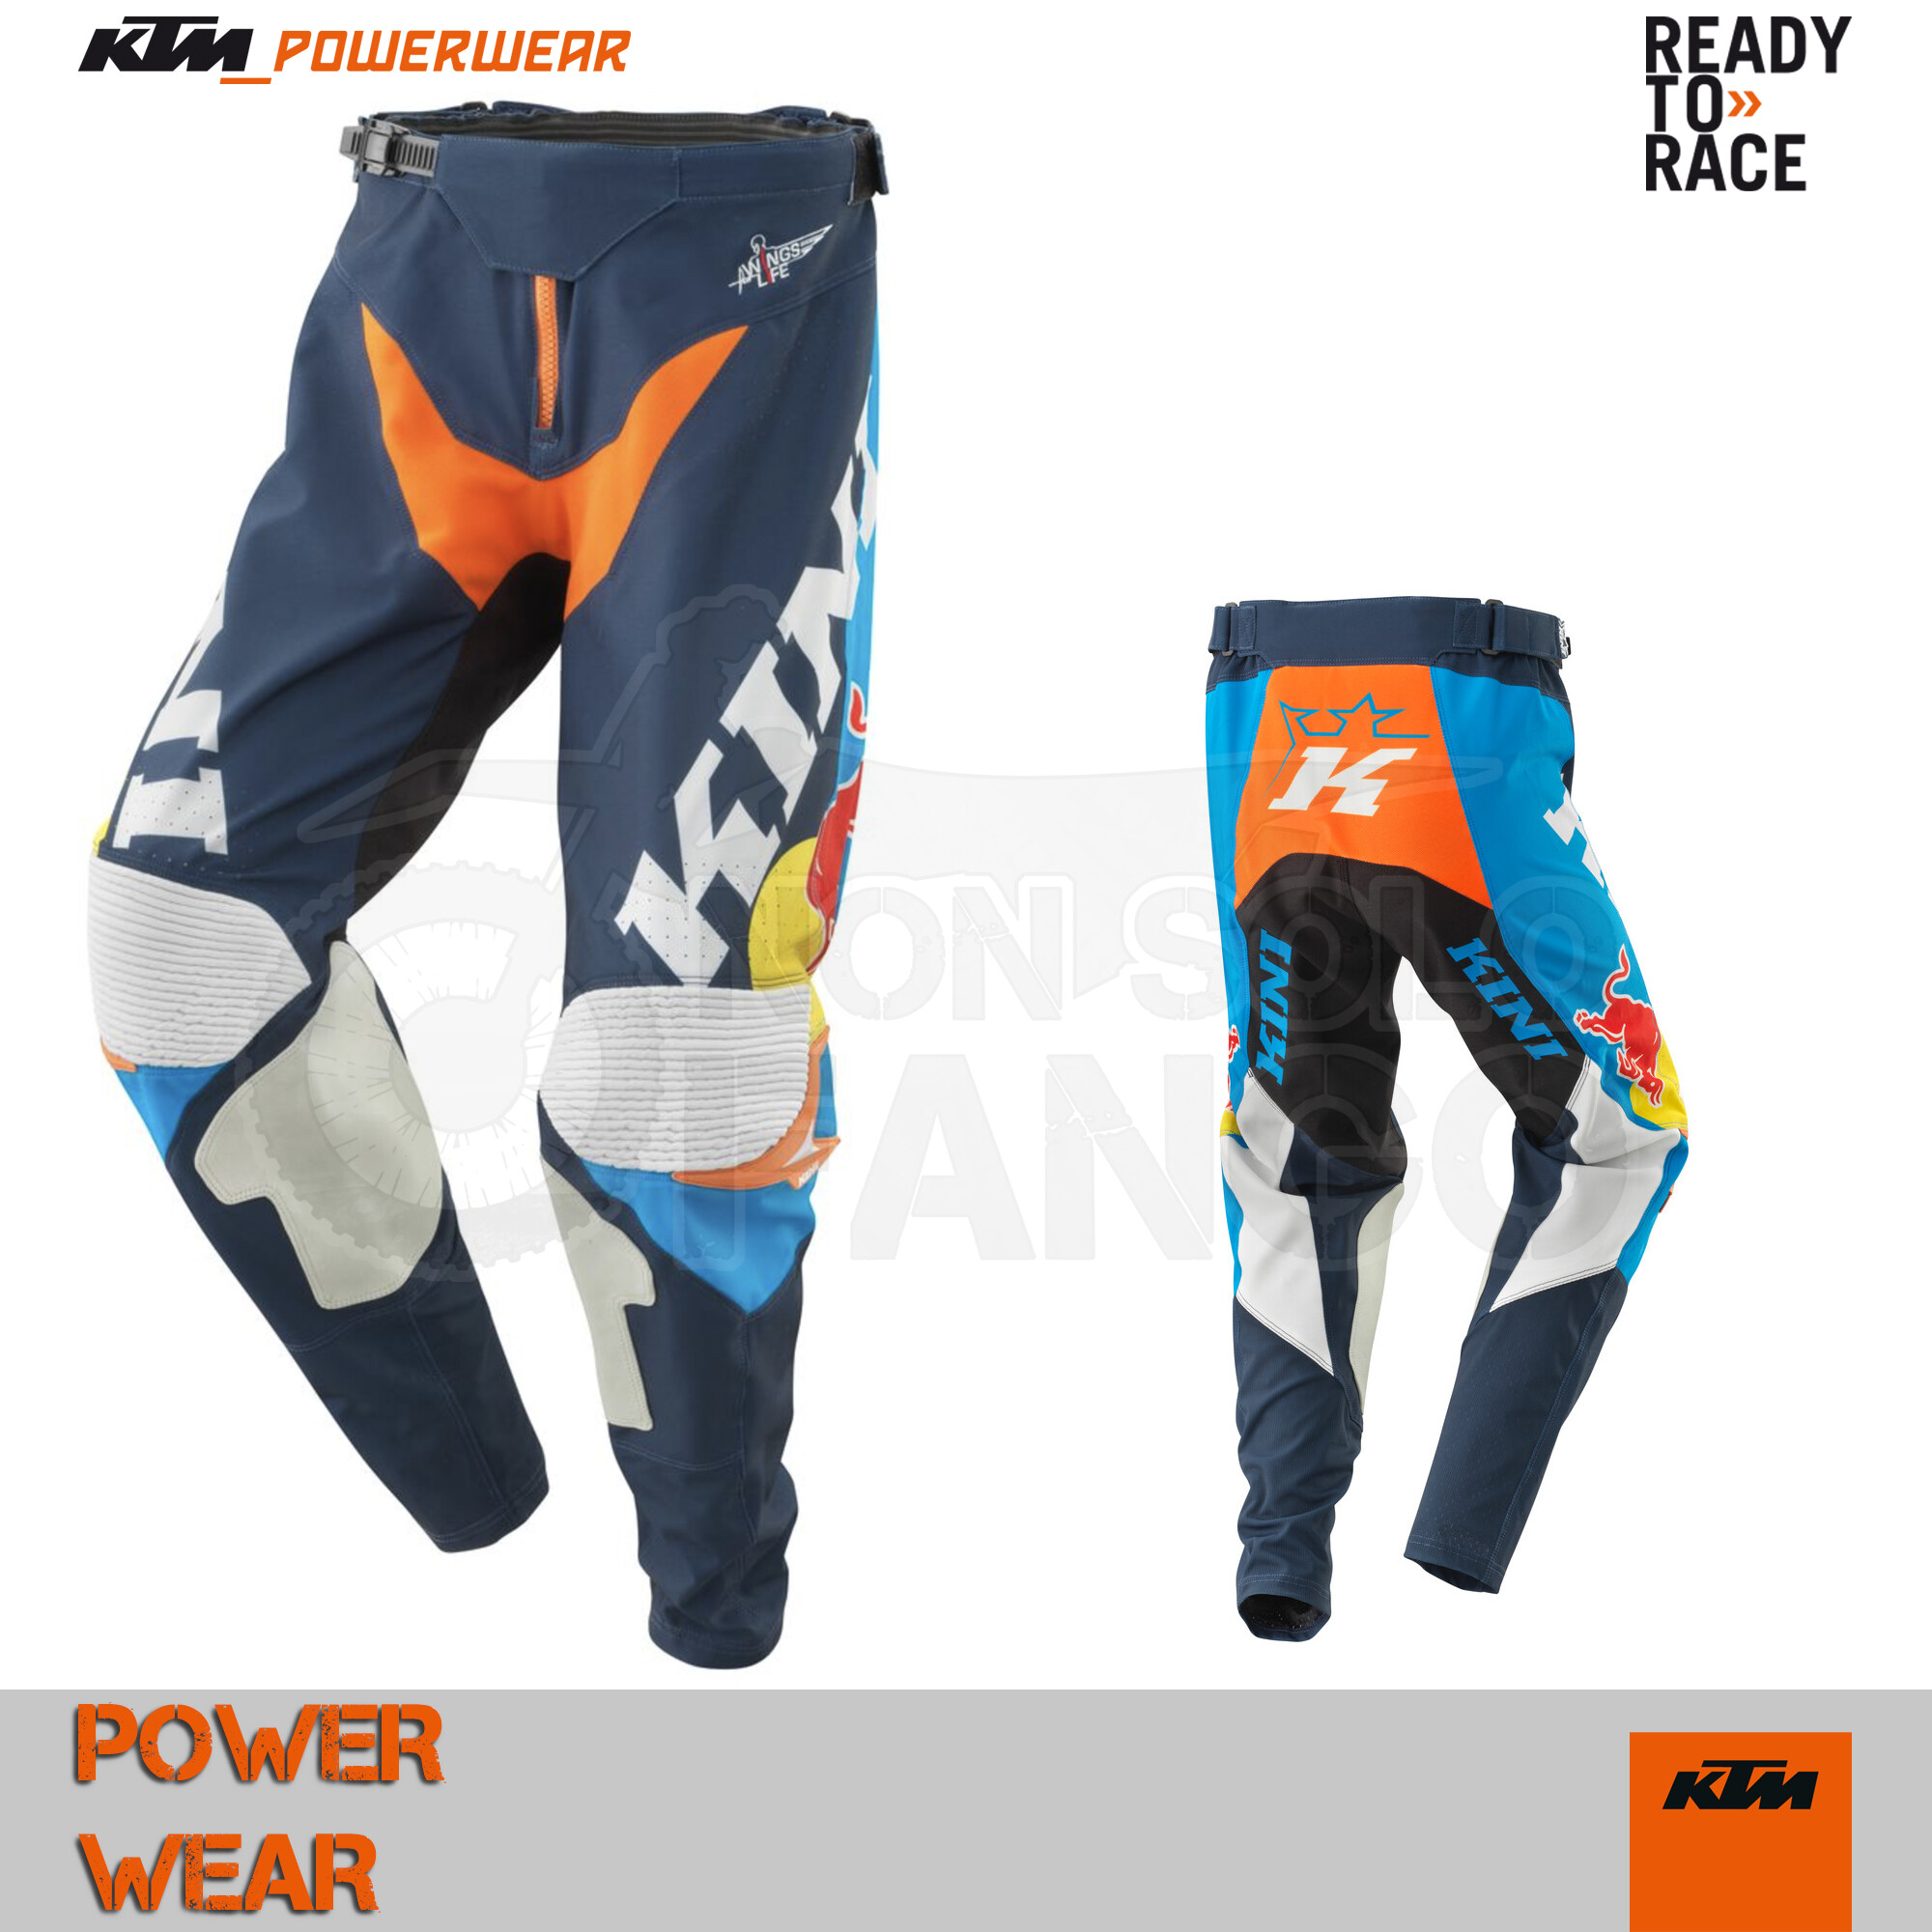 MAILLOT CROSS/ENDURO KTM KINI-RB COMPETITION SHIRT SIZE_POWERWEAR S